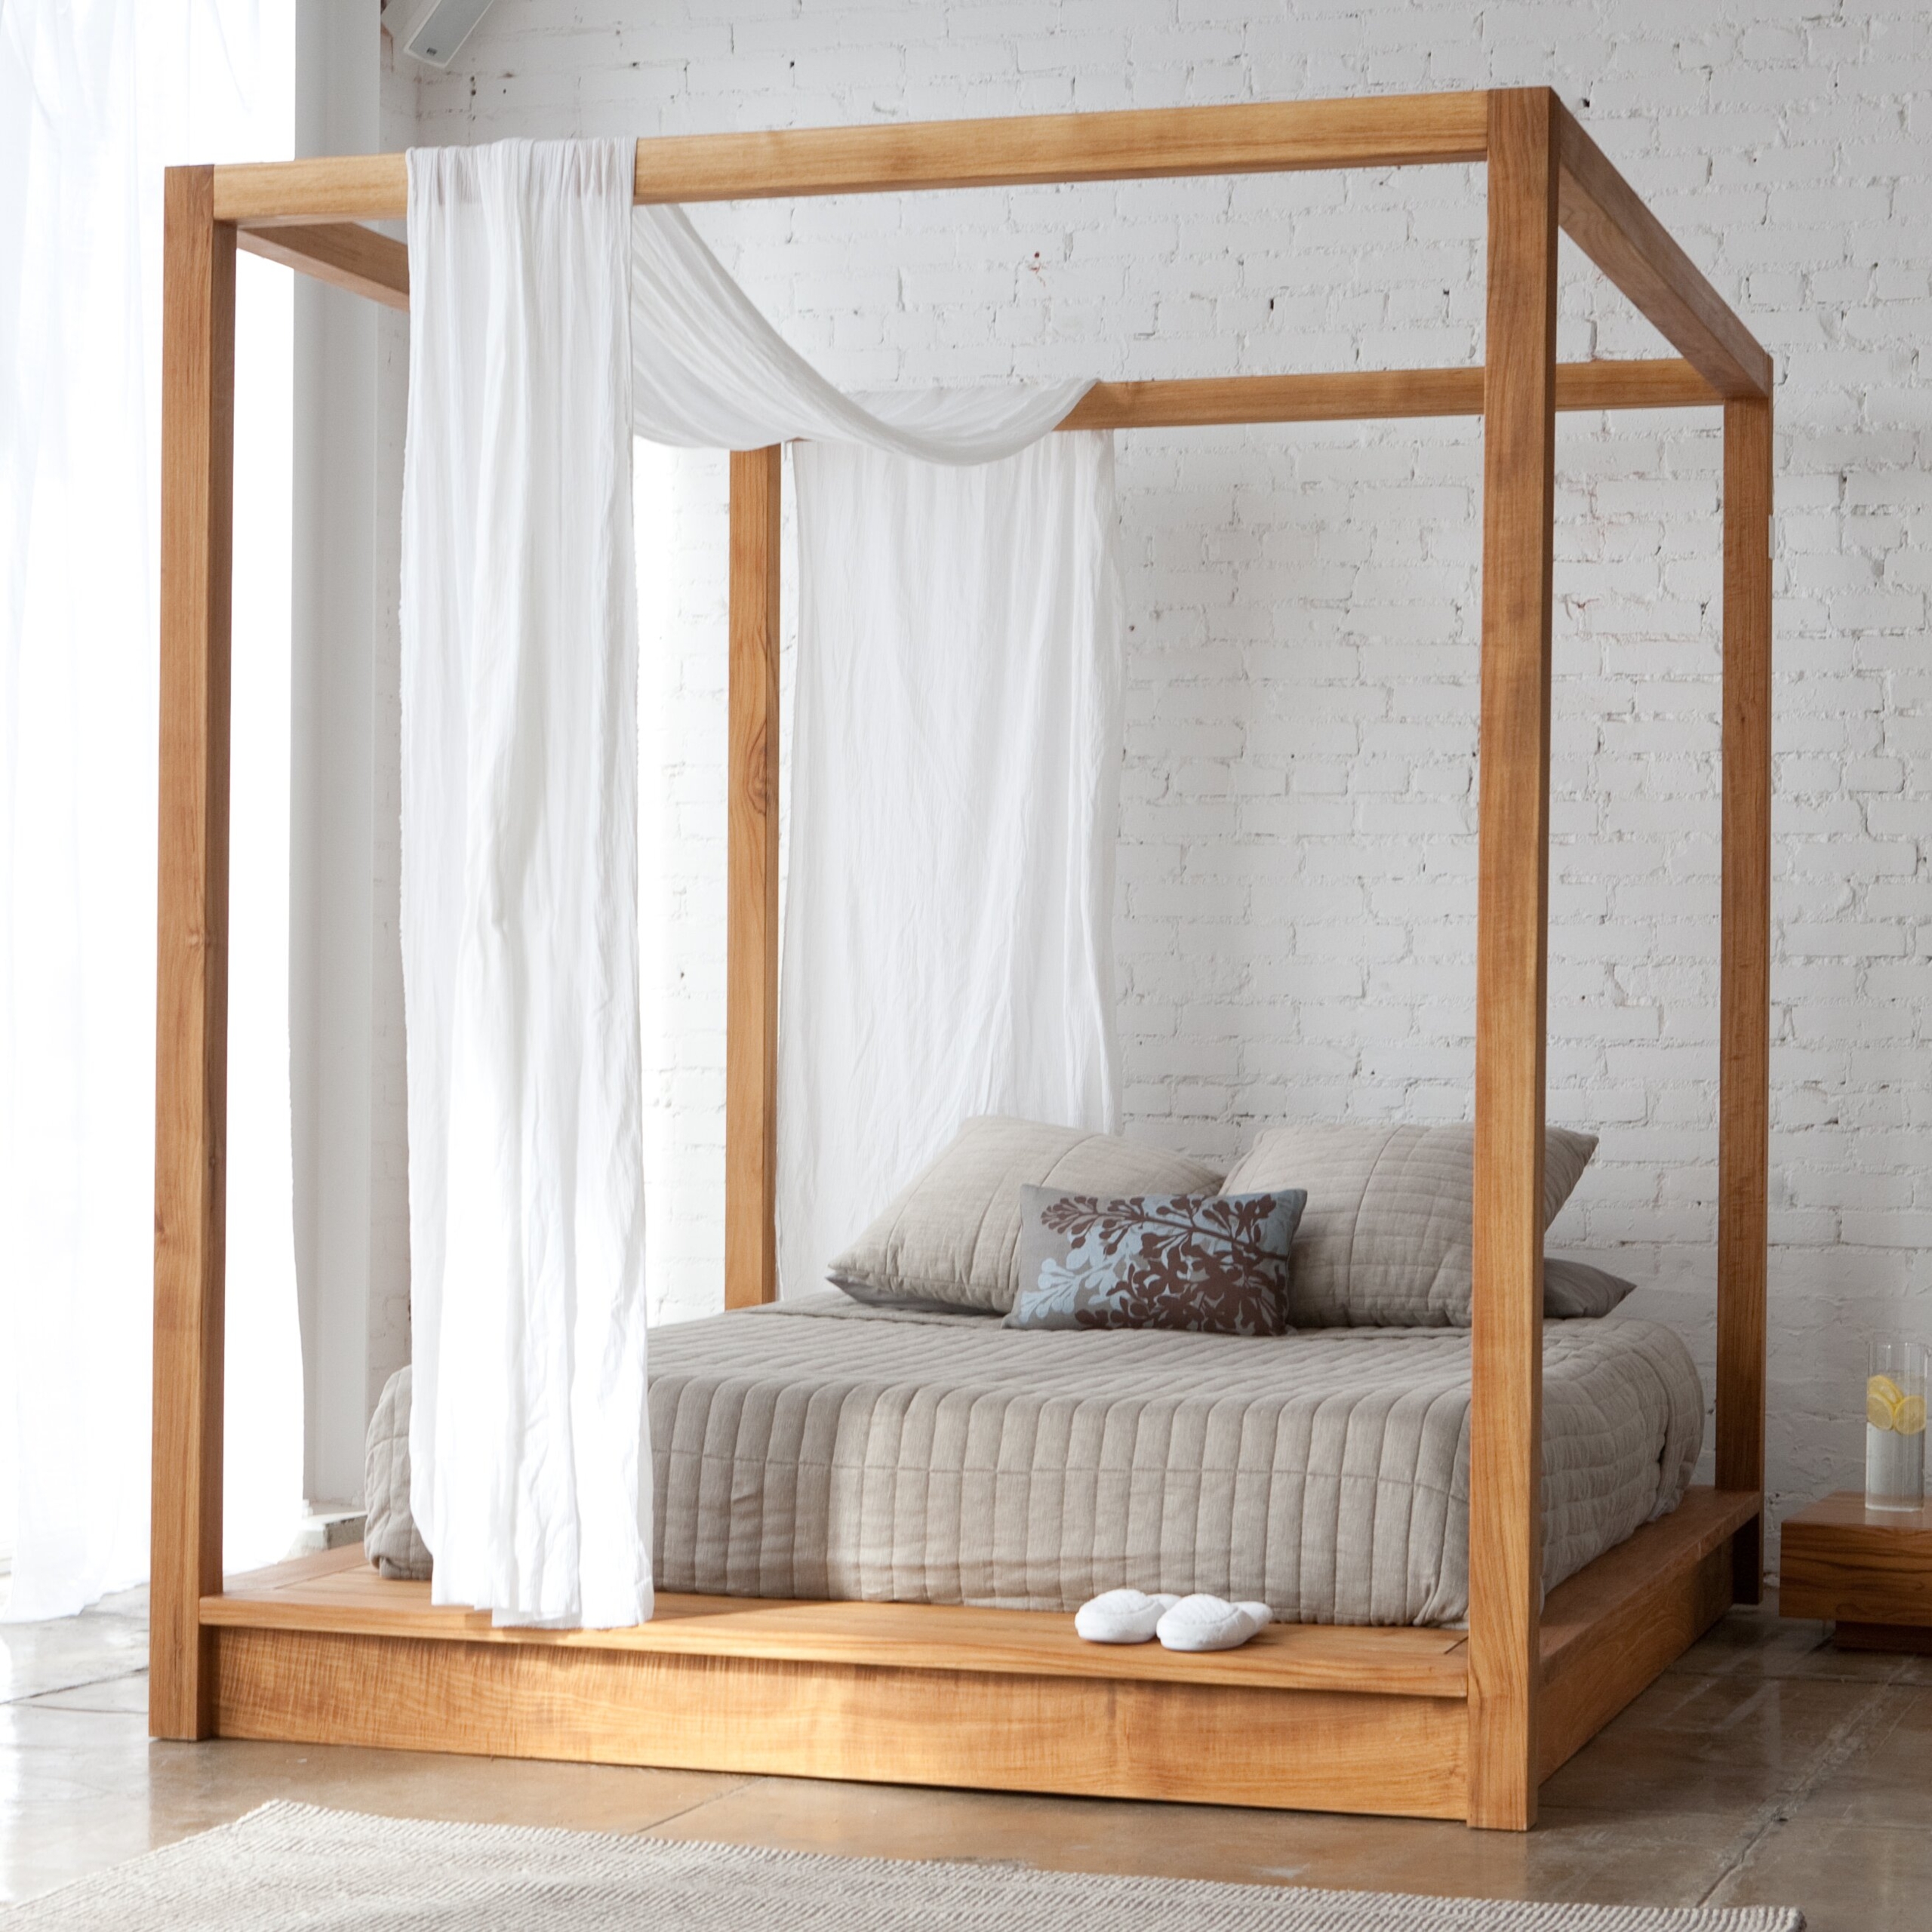 Low platform bed with canopy king size